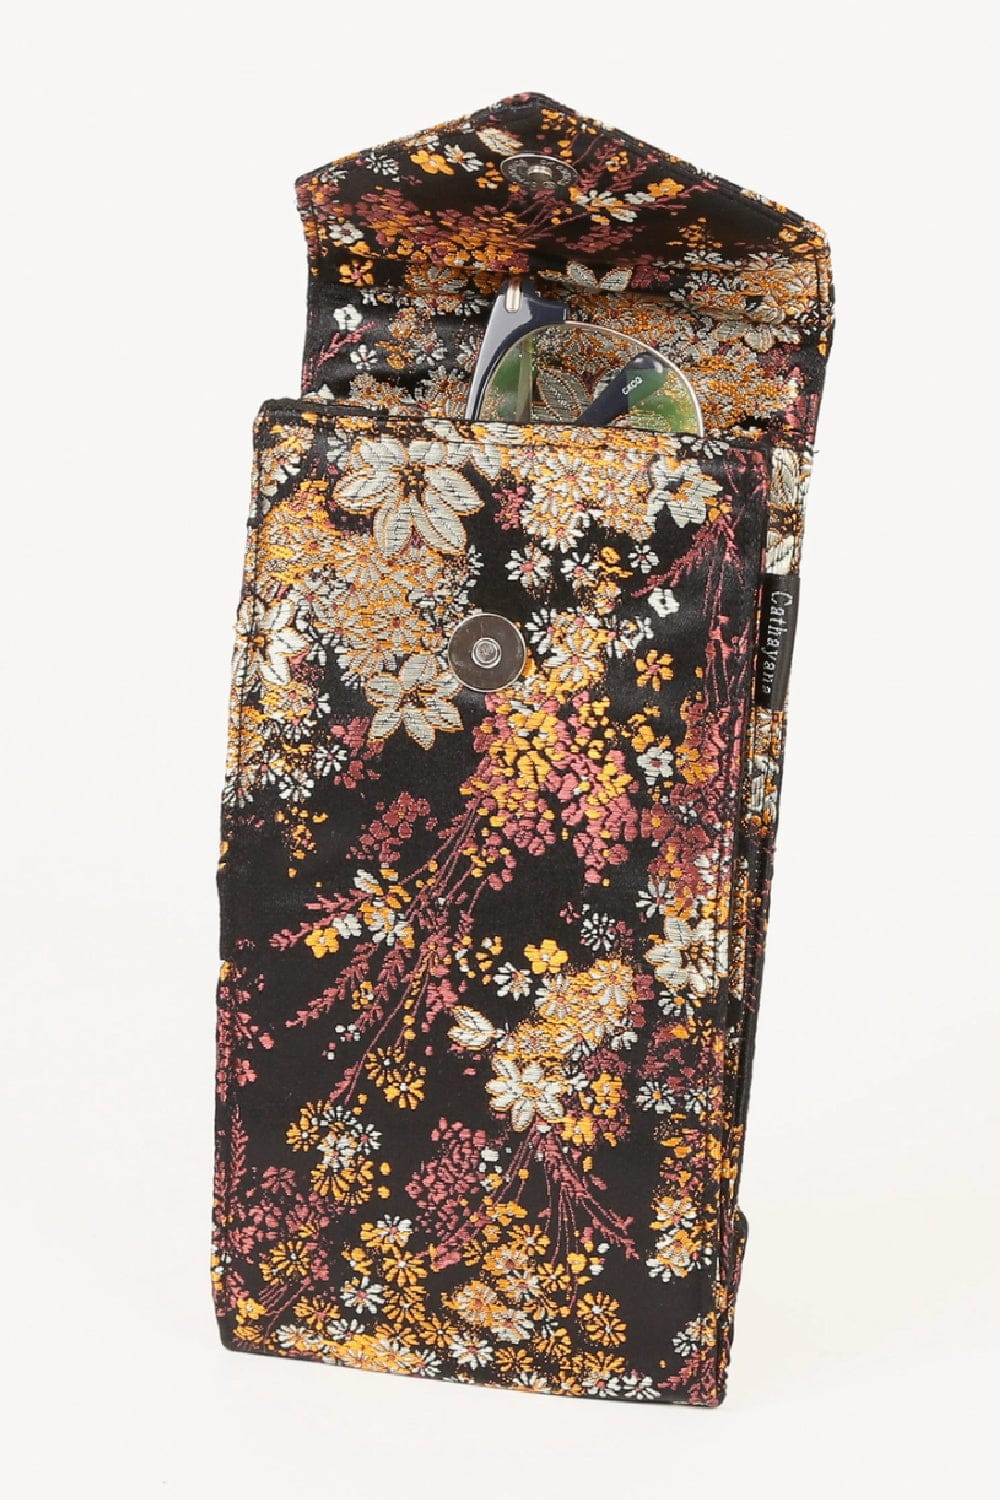 Black floral print eyeglass case with a front snap.